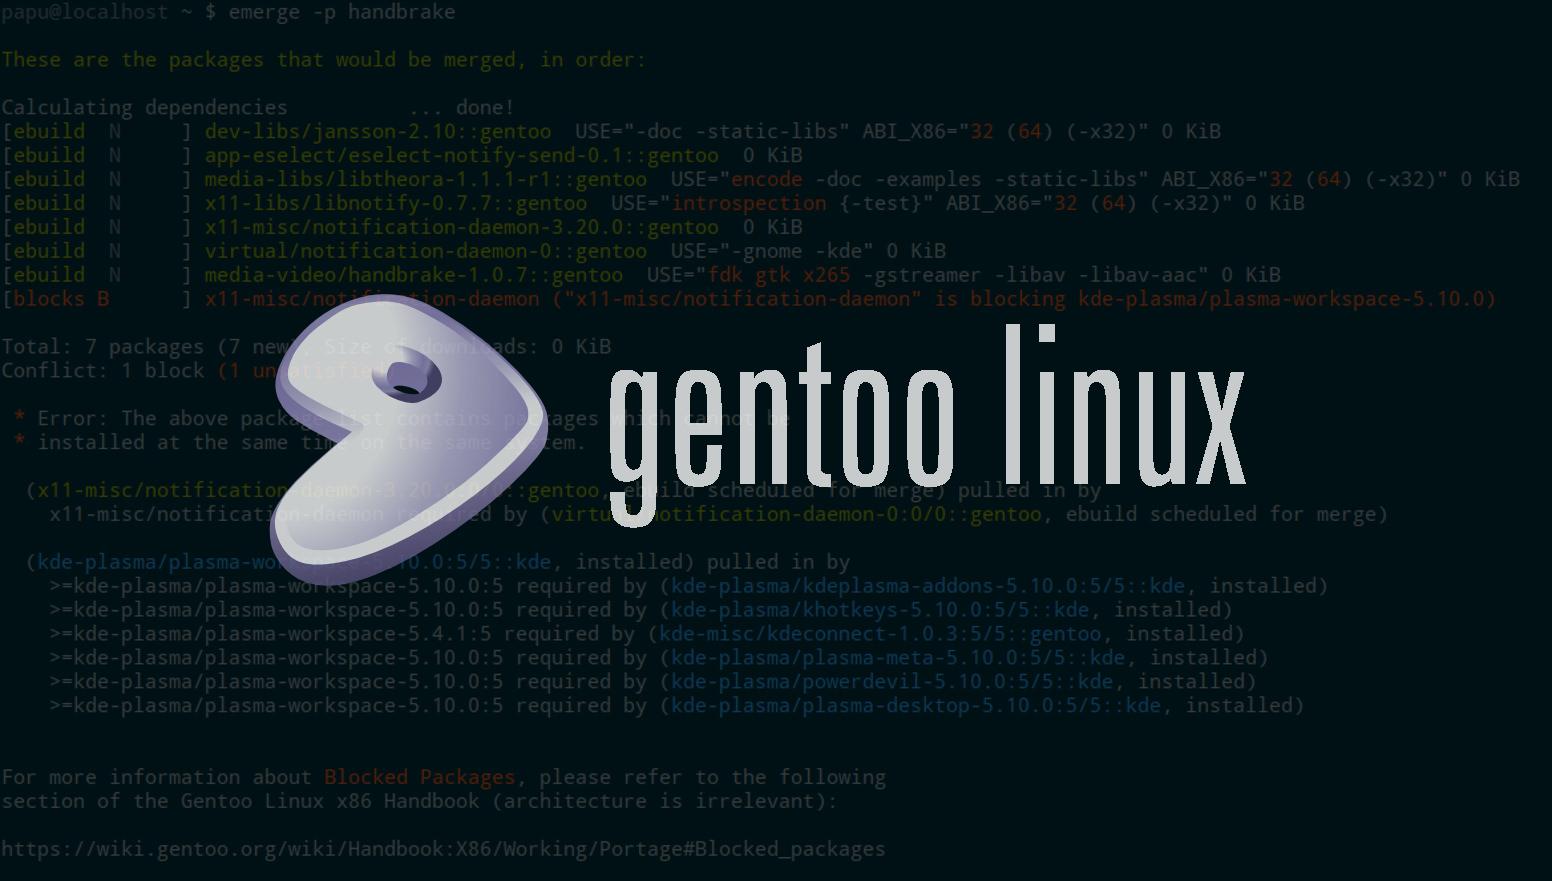 More about Gentoo Linux